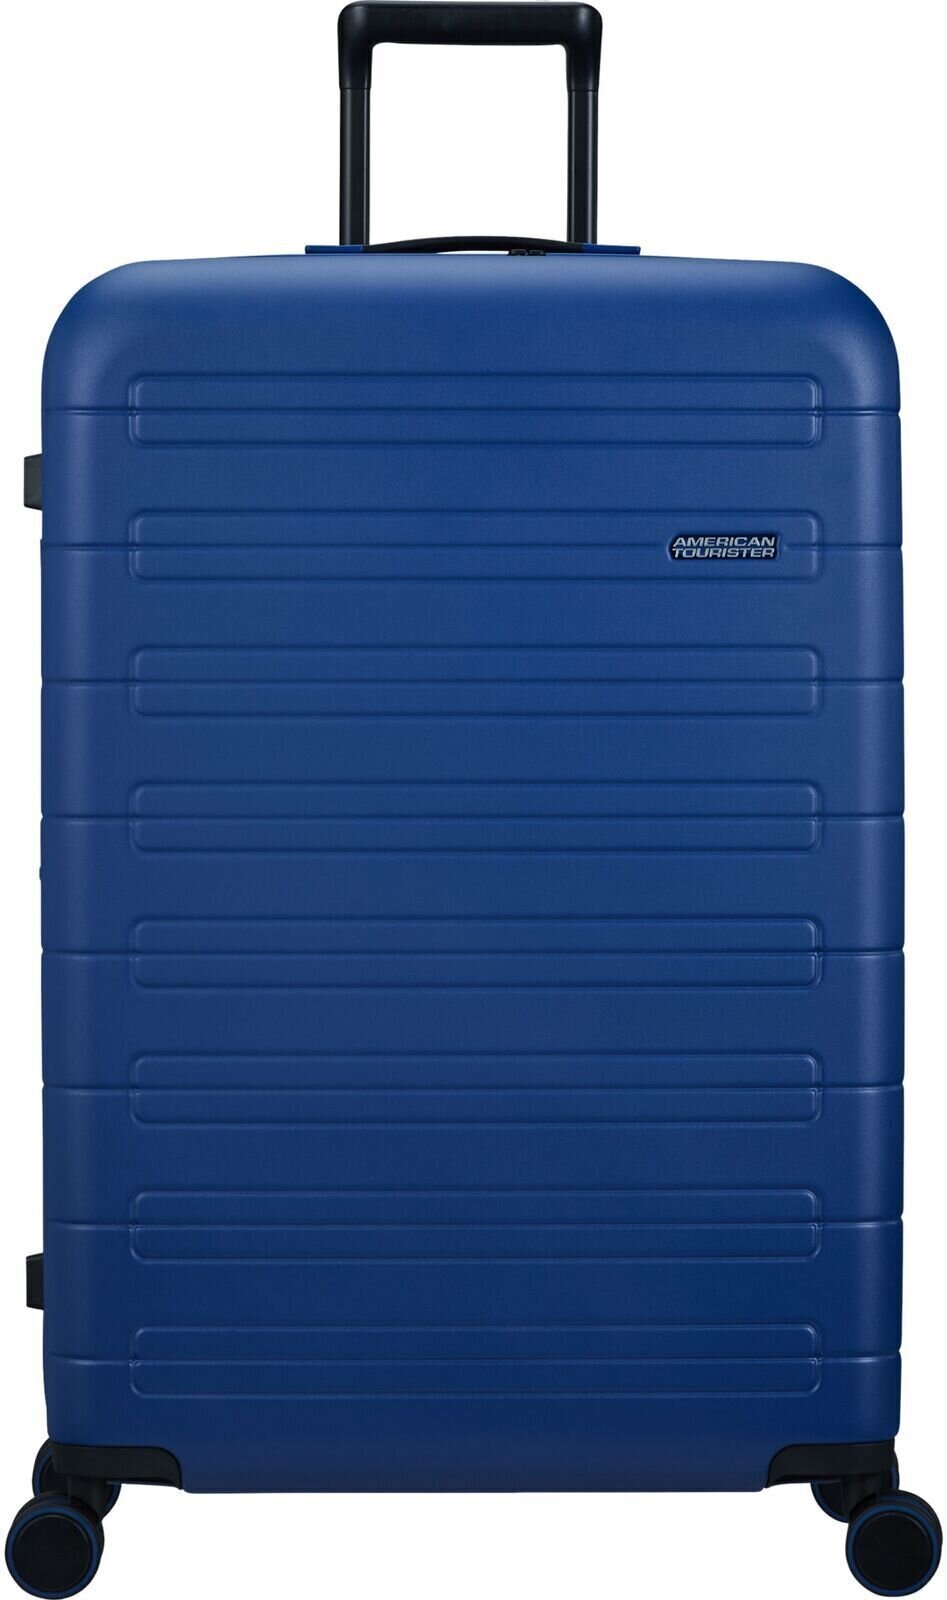 Lifestyle Σακίδιο Πλάτης / Τσάντα American Tourister Novastream Spinner EXP 77/28 Large Check-in Navy Blue 103/121 L Αποσκευές